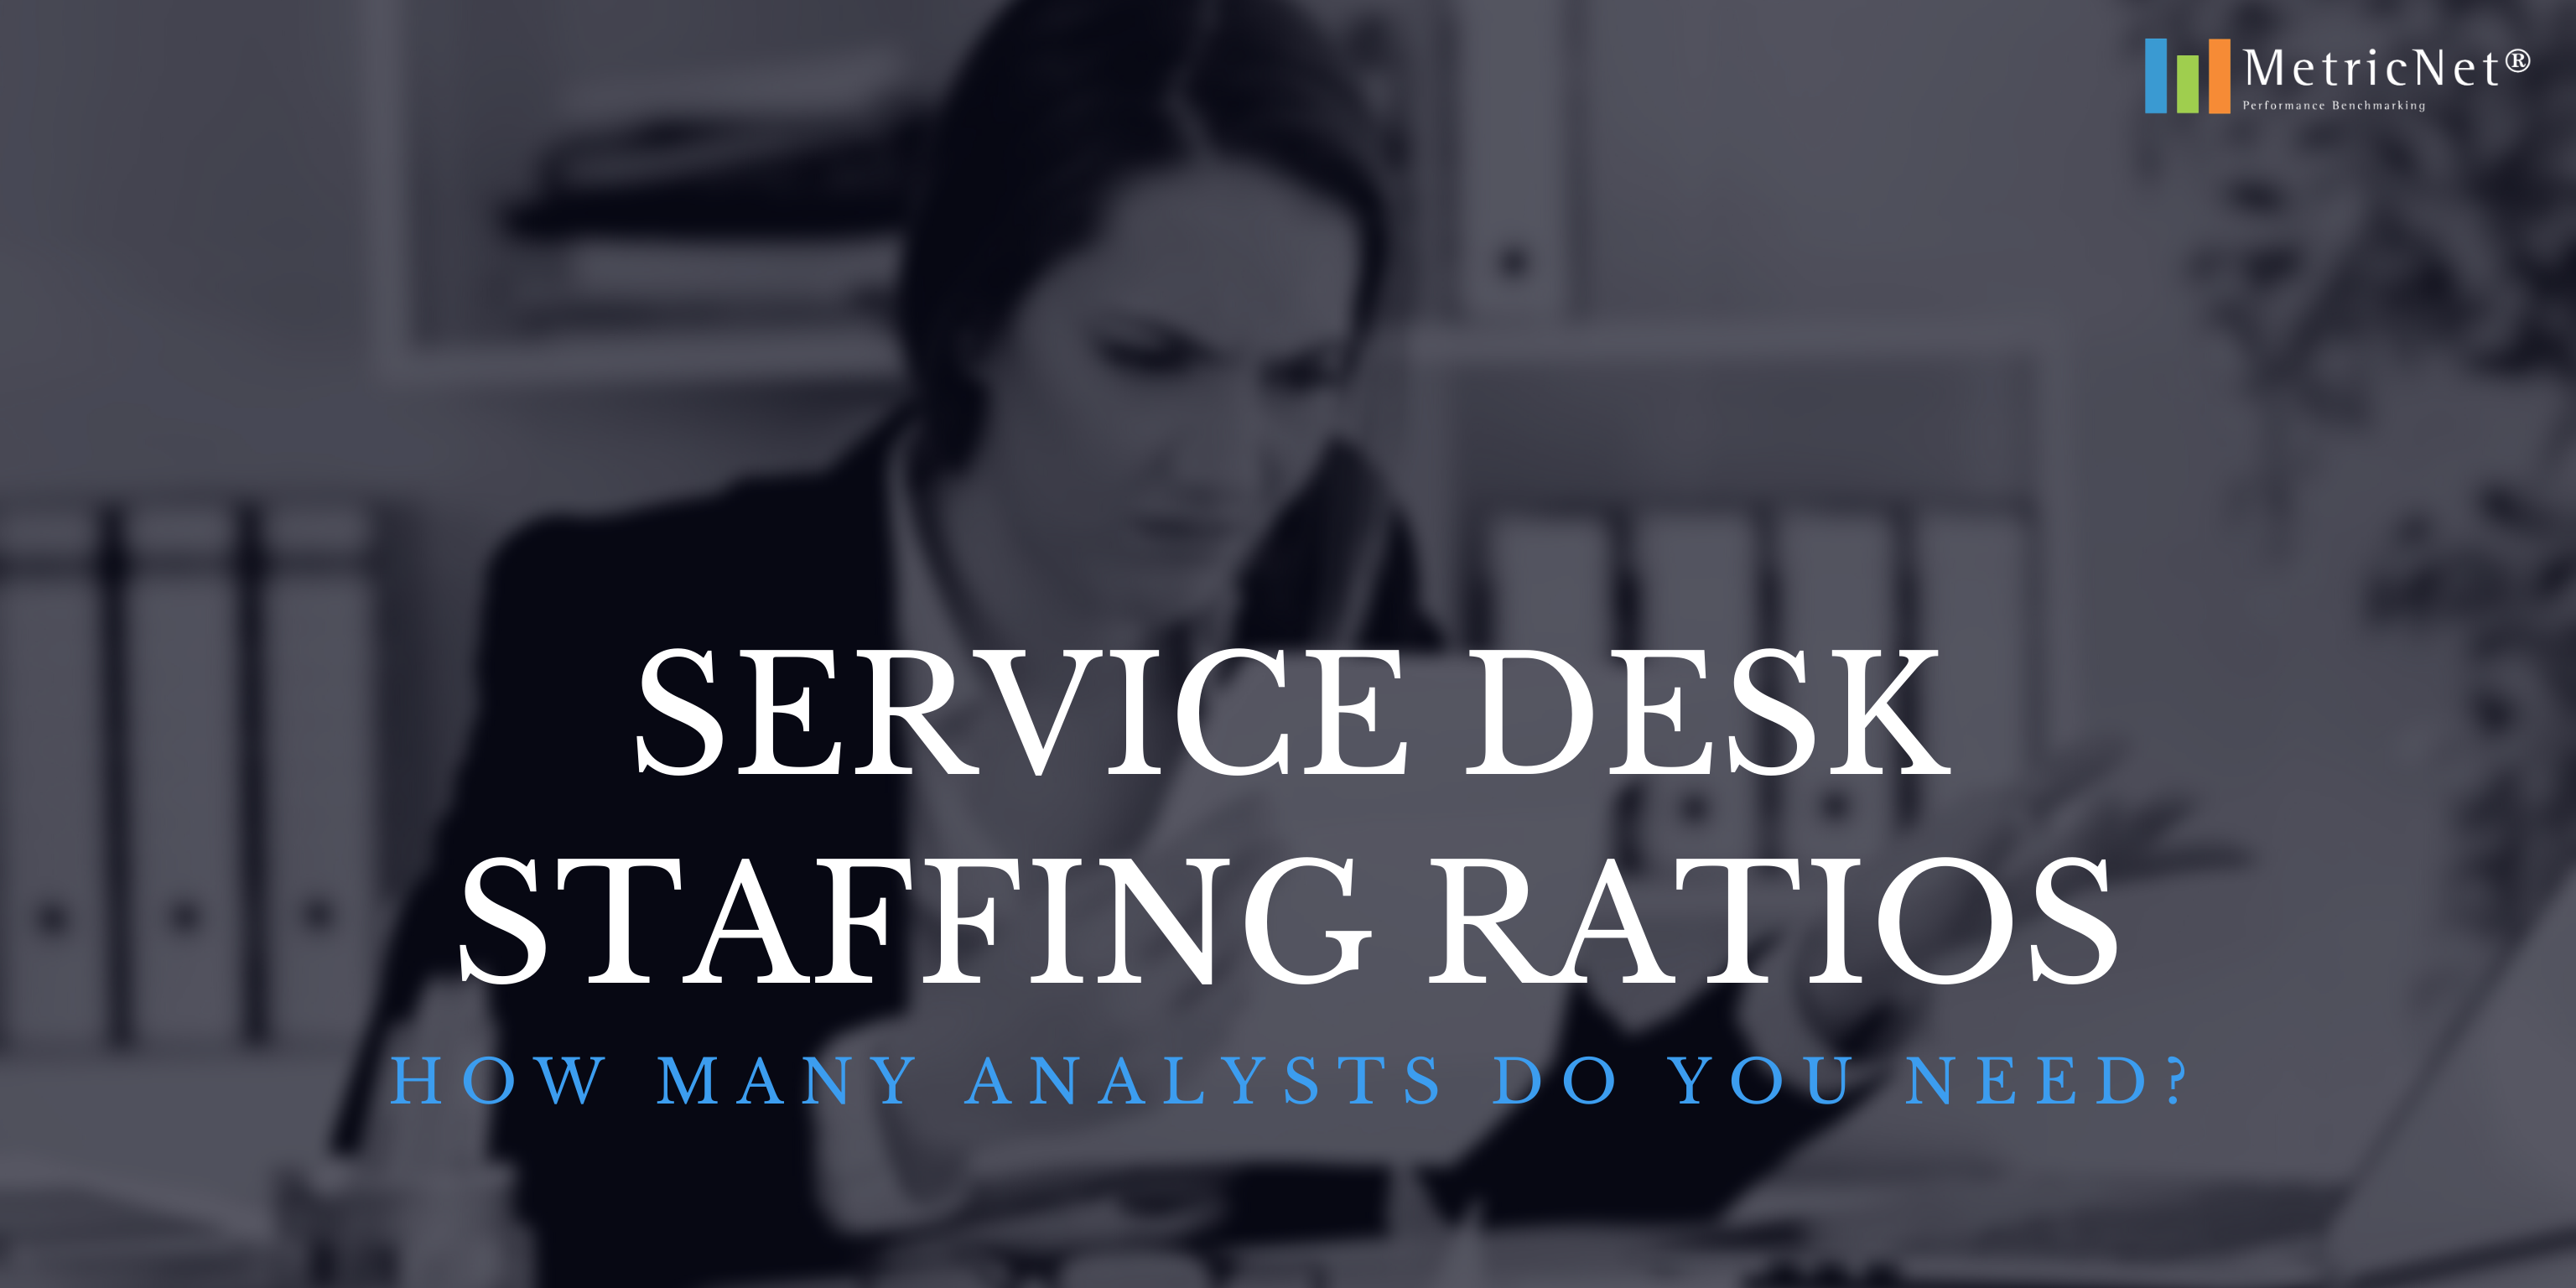 Service Desk Staffing Ratios: How Many Analysts do You Need?